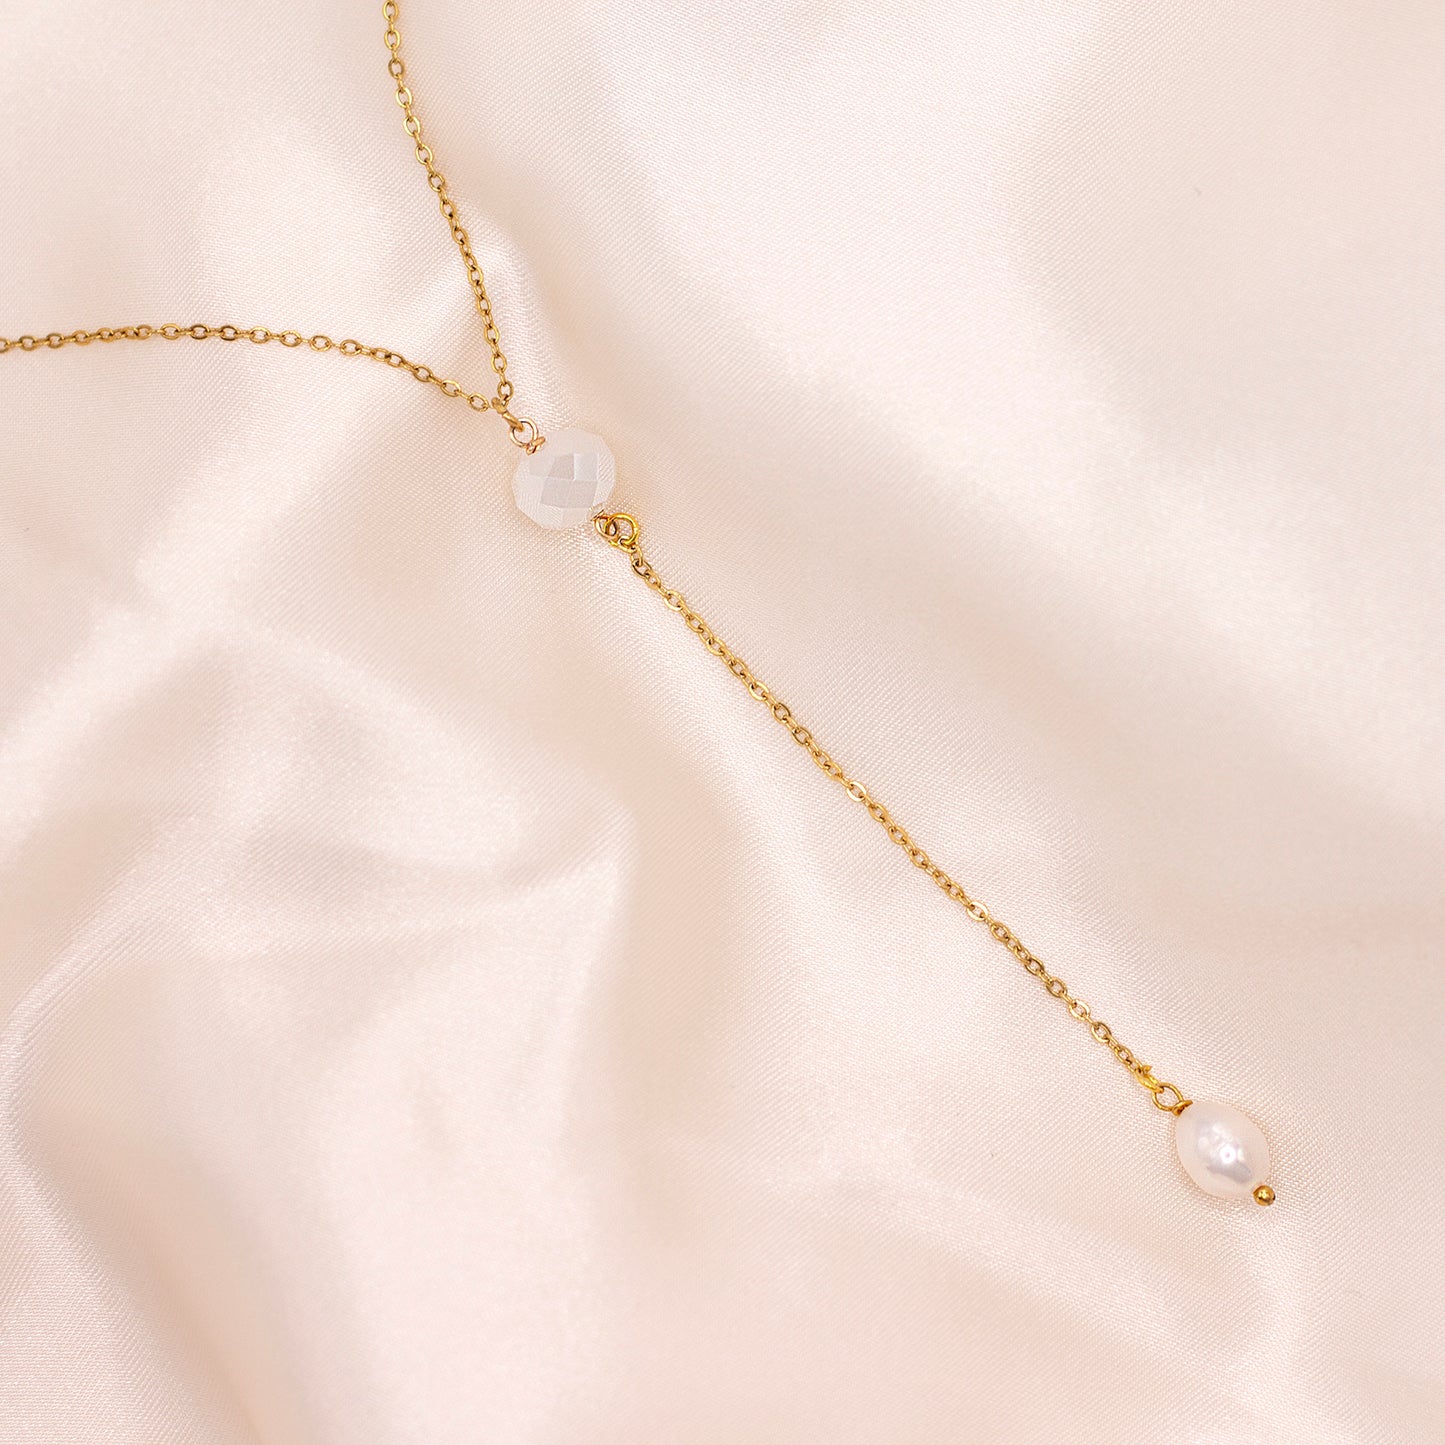 Pearl lariat necklace with white glass bead and gold-plated stainless steel chain. Hypoallergenic and water resistant.